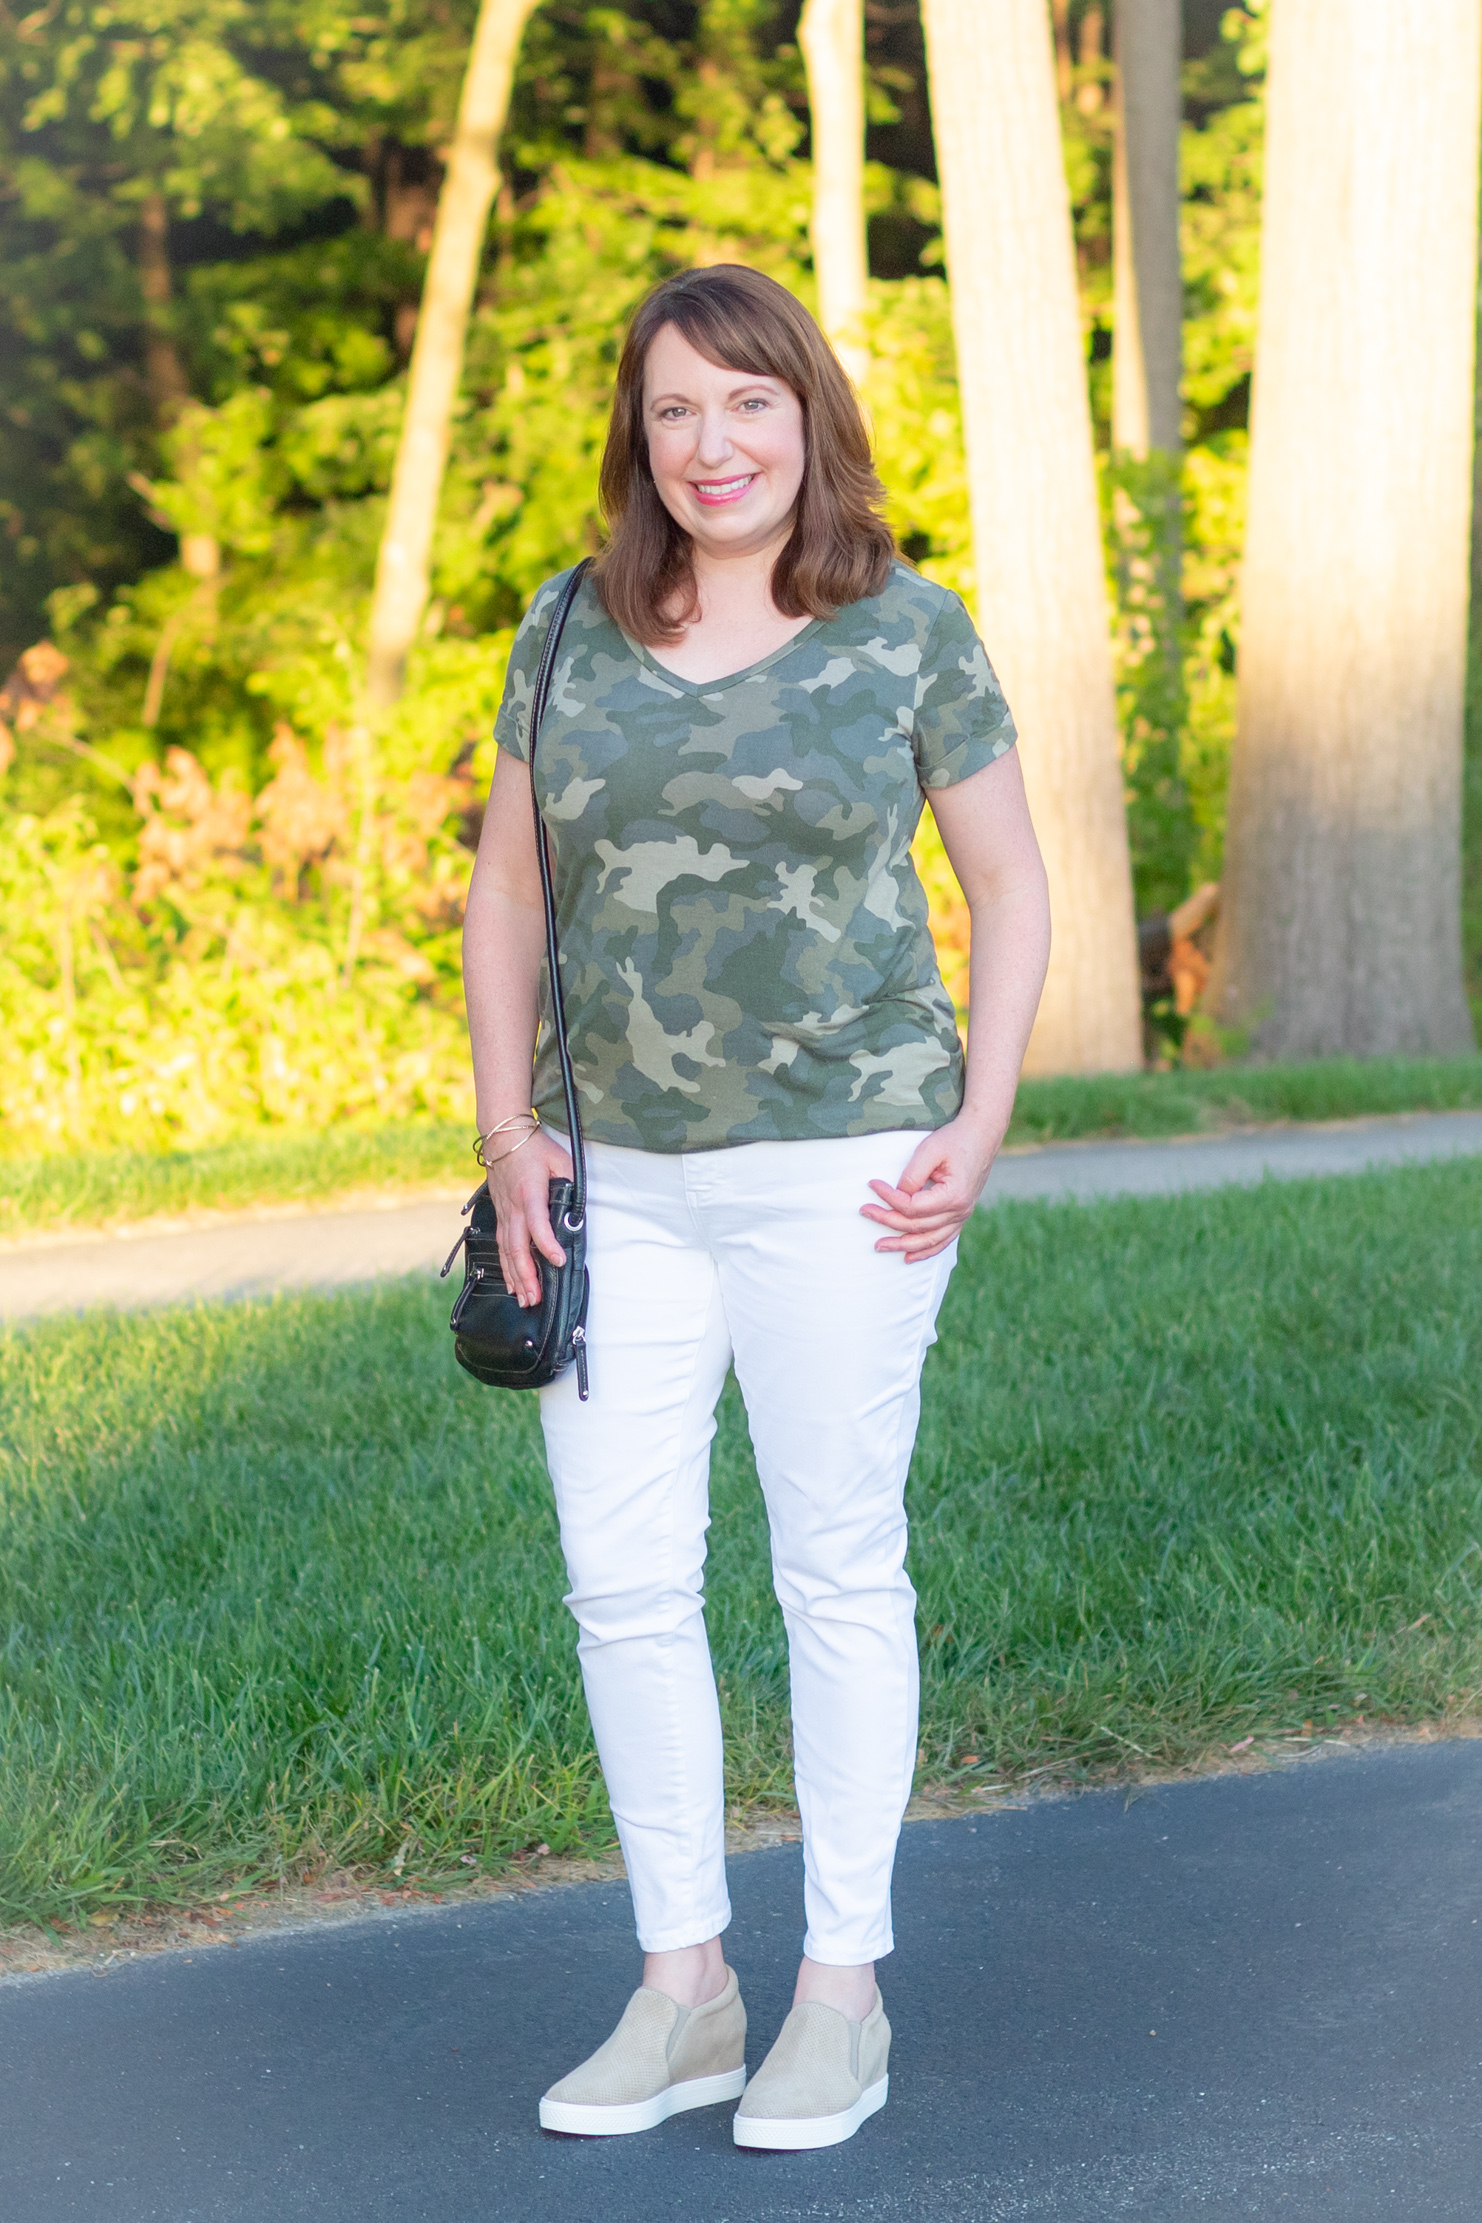 Fall Look With Camo Tee & White Jeans